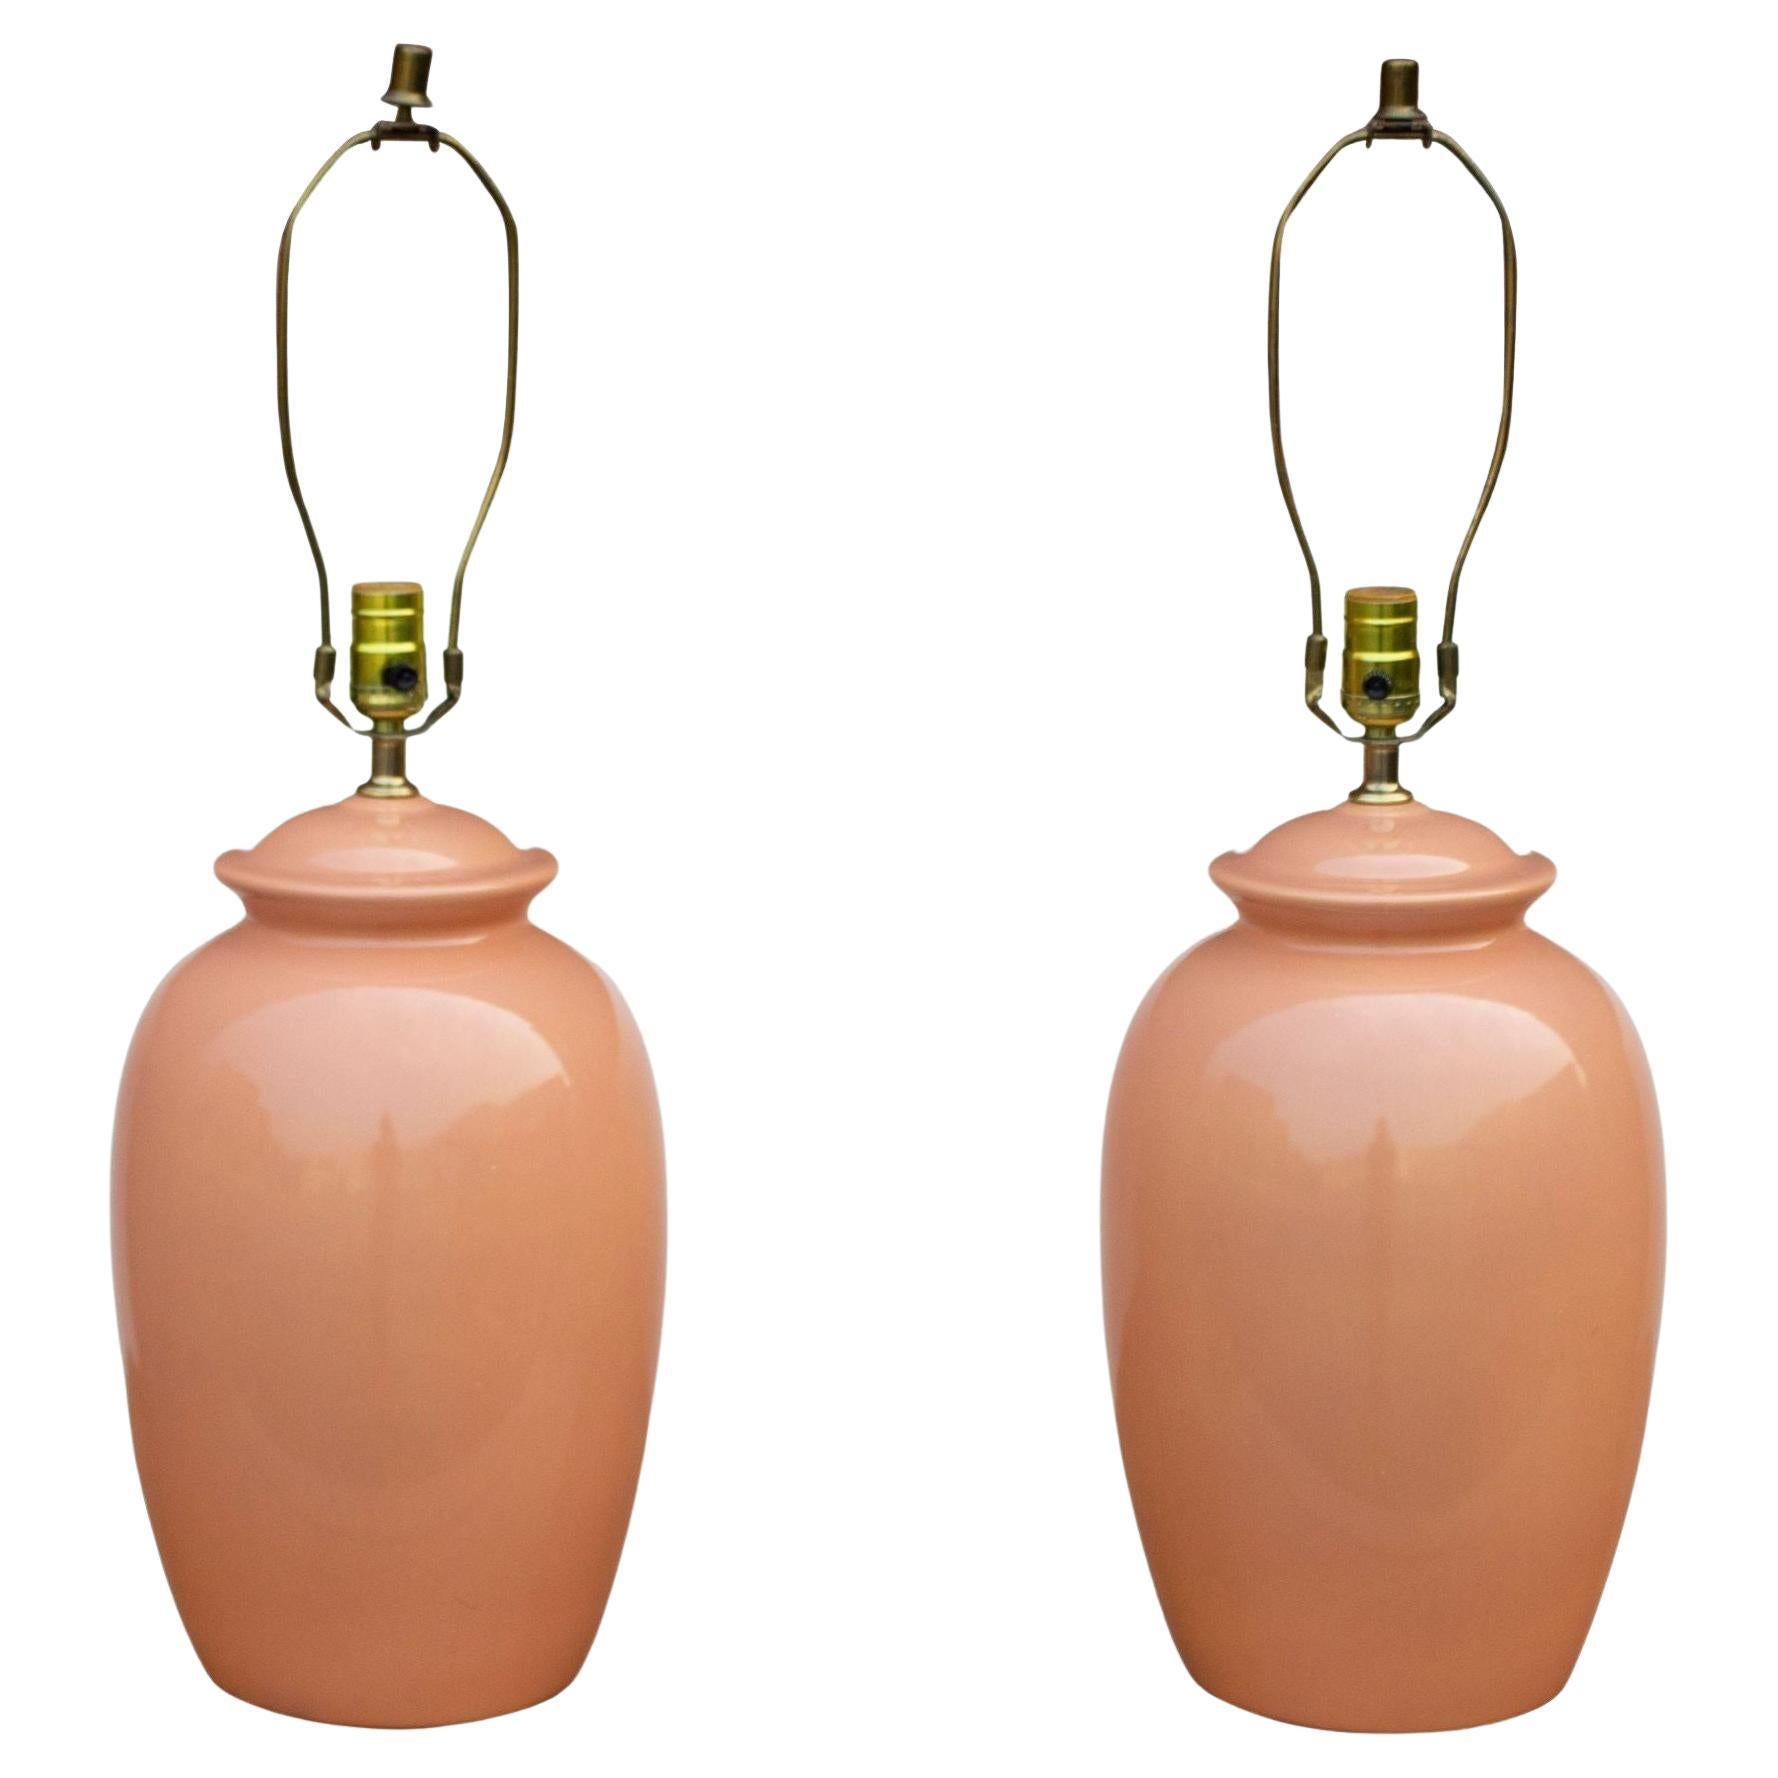 Peach Ginger Jar Ceramic Table Lamps For Sale